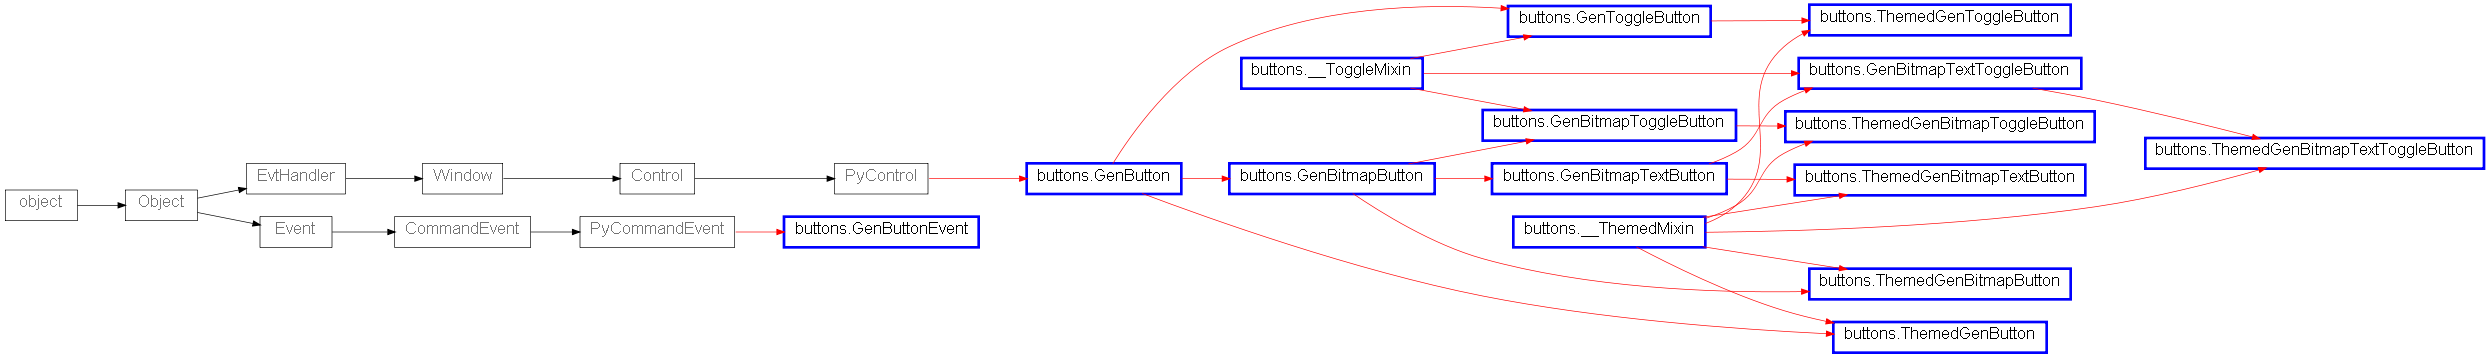 Inheritance diagram of buttons